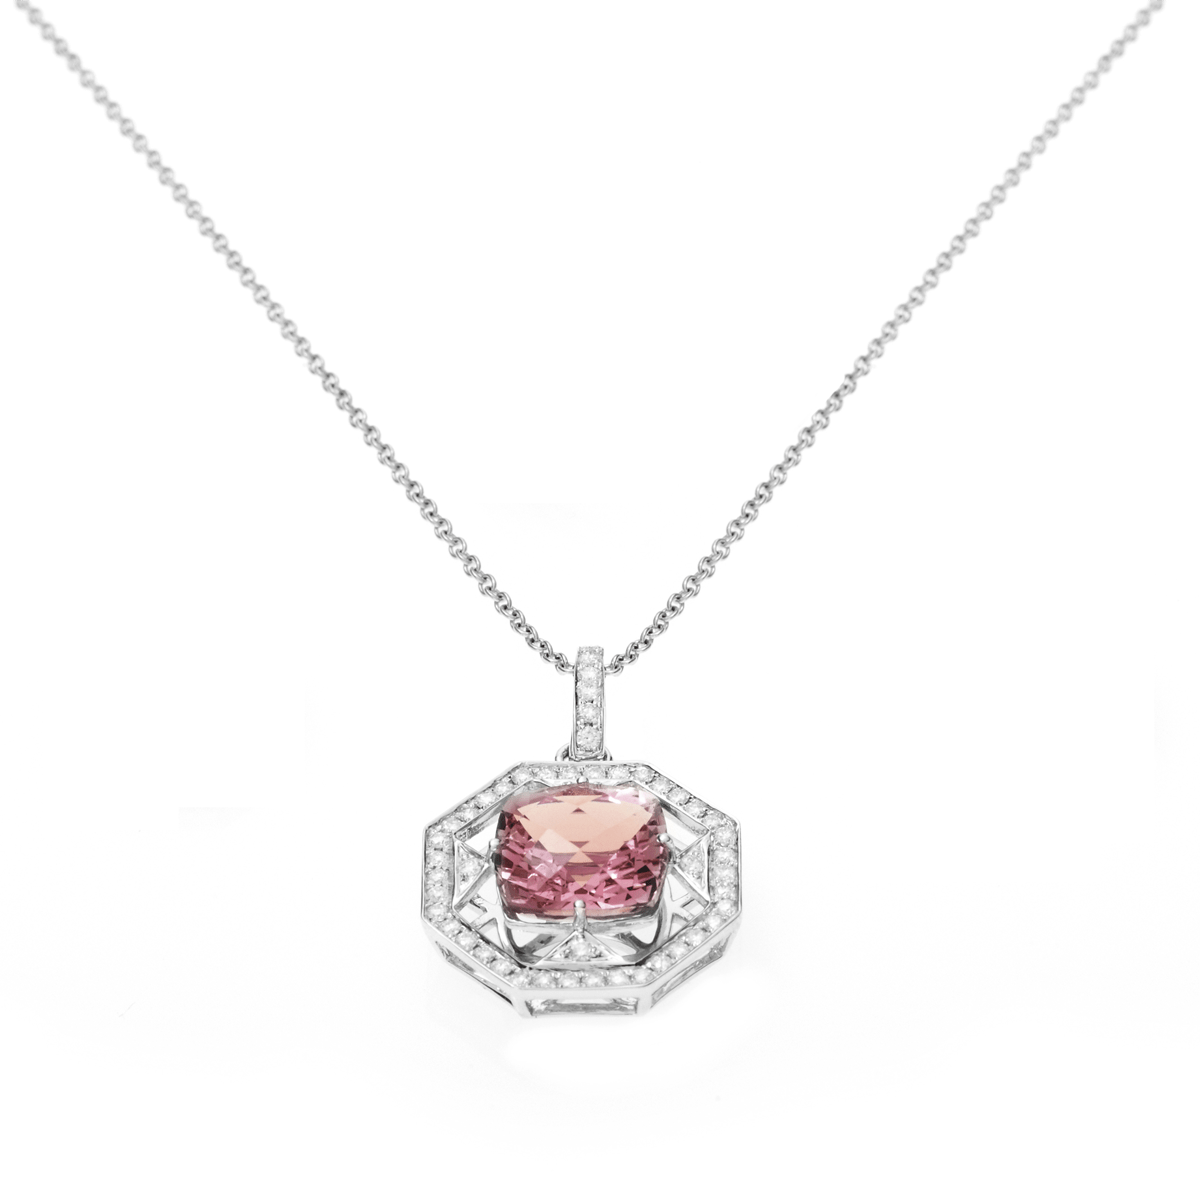 PINK TOURMALINE NECKLACE- FENG SHI - Chris Aire Fine Jewelry & Timepieces